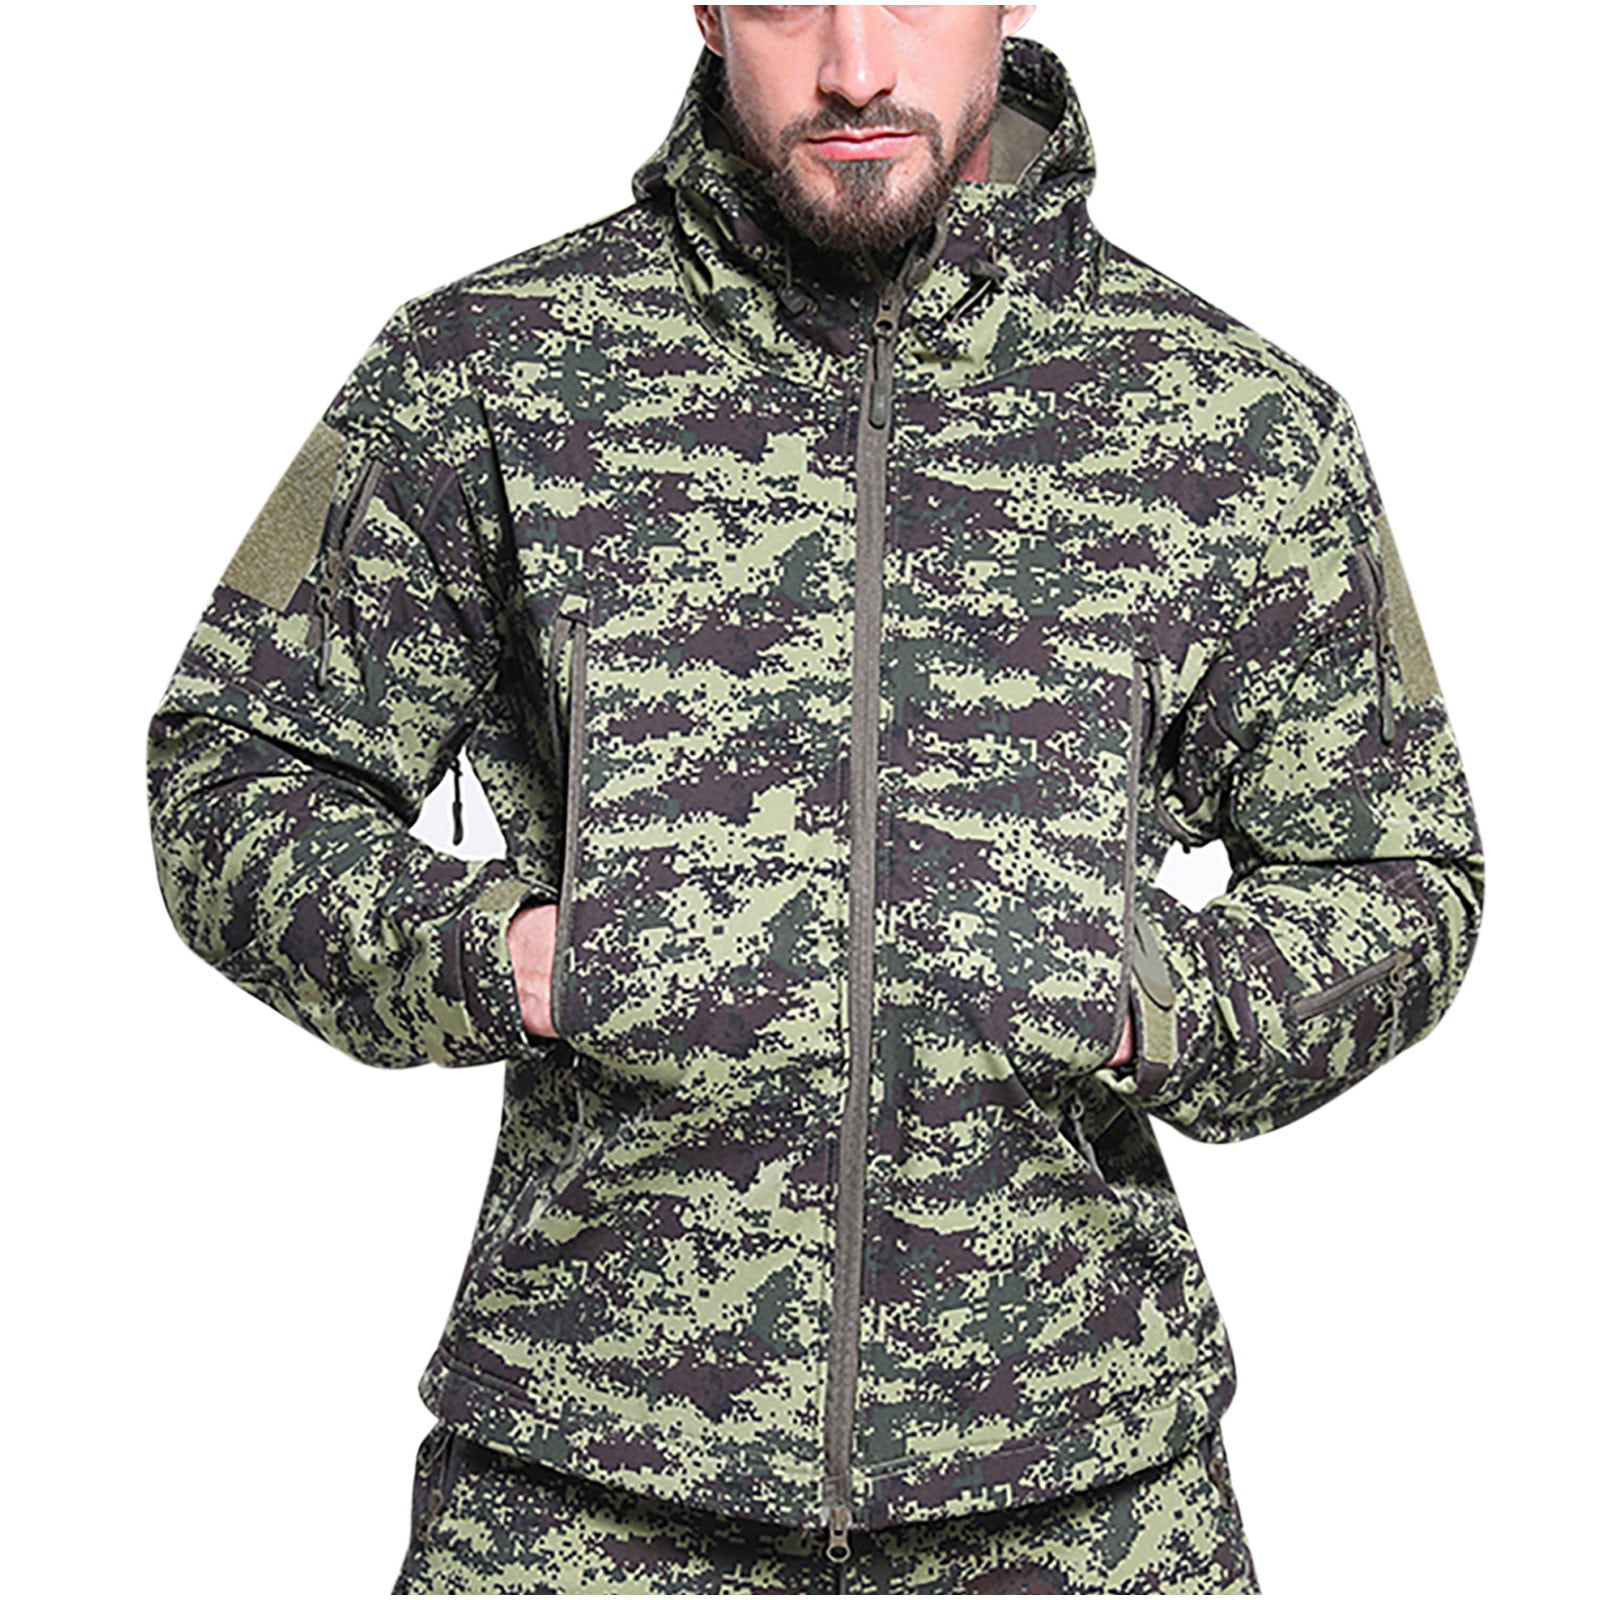 Waterproof And Warm Camouflage Size XL Shooting Hunting Fishing Jacket 